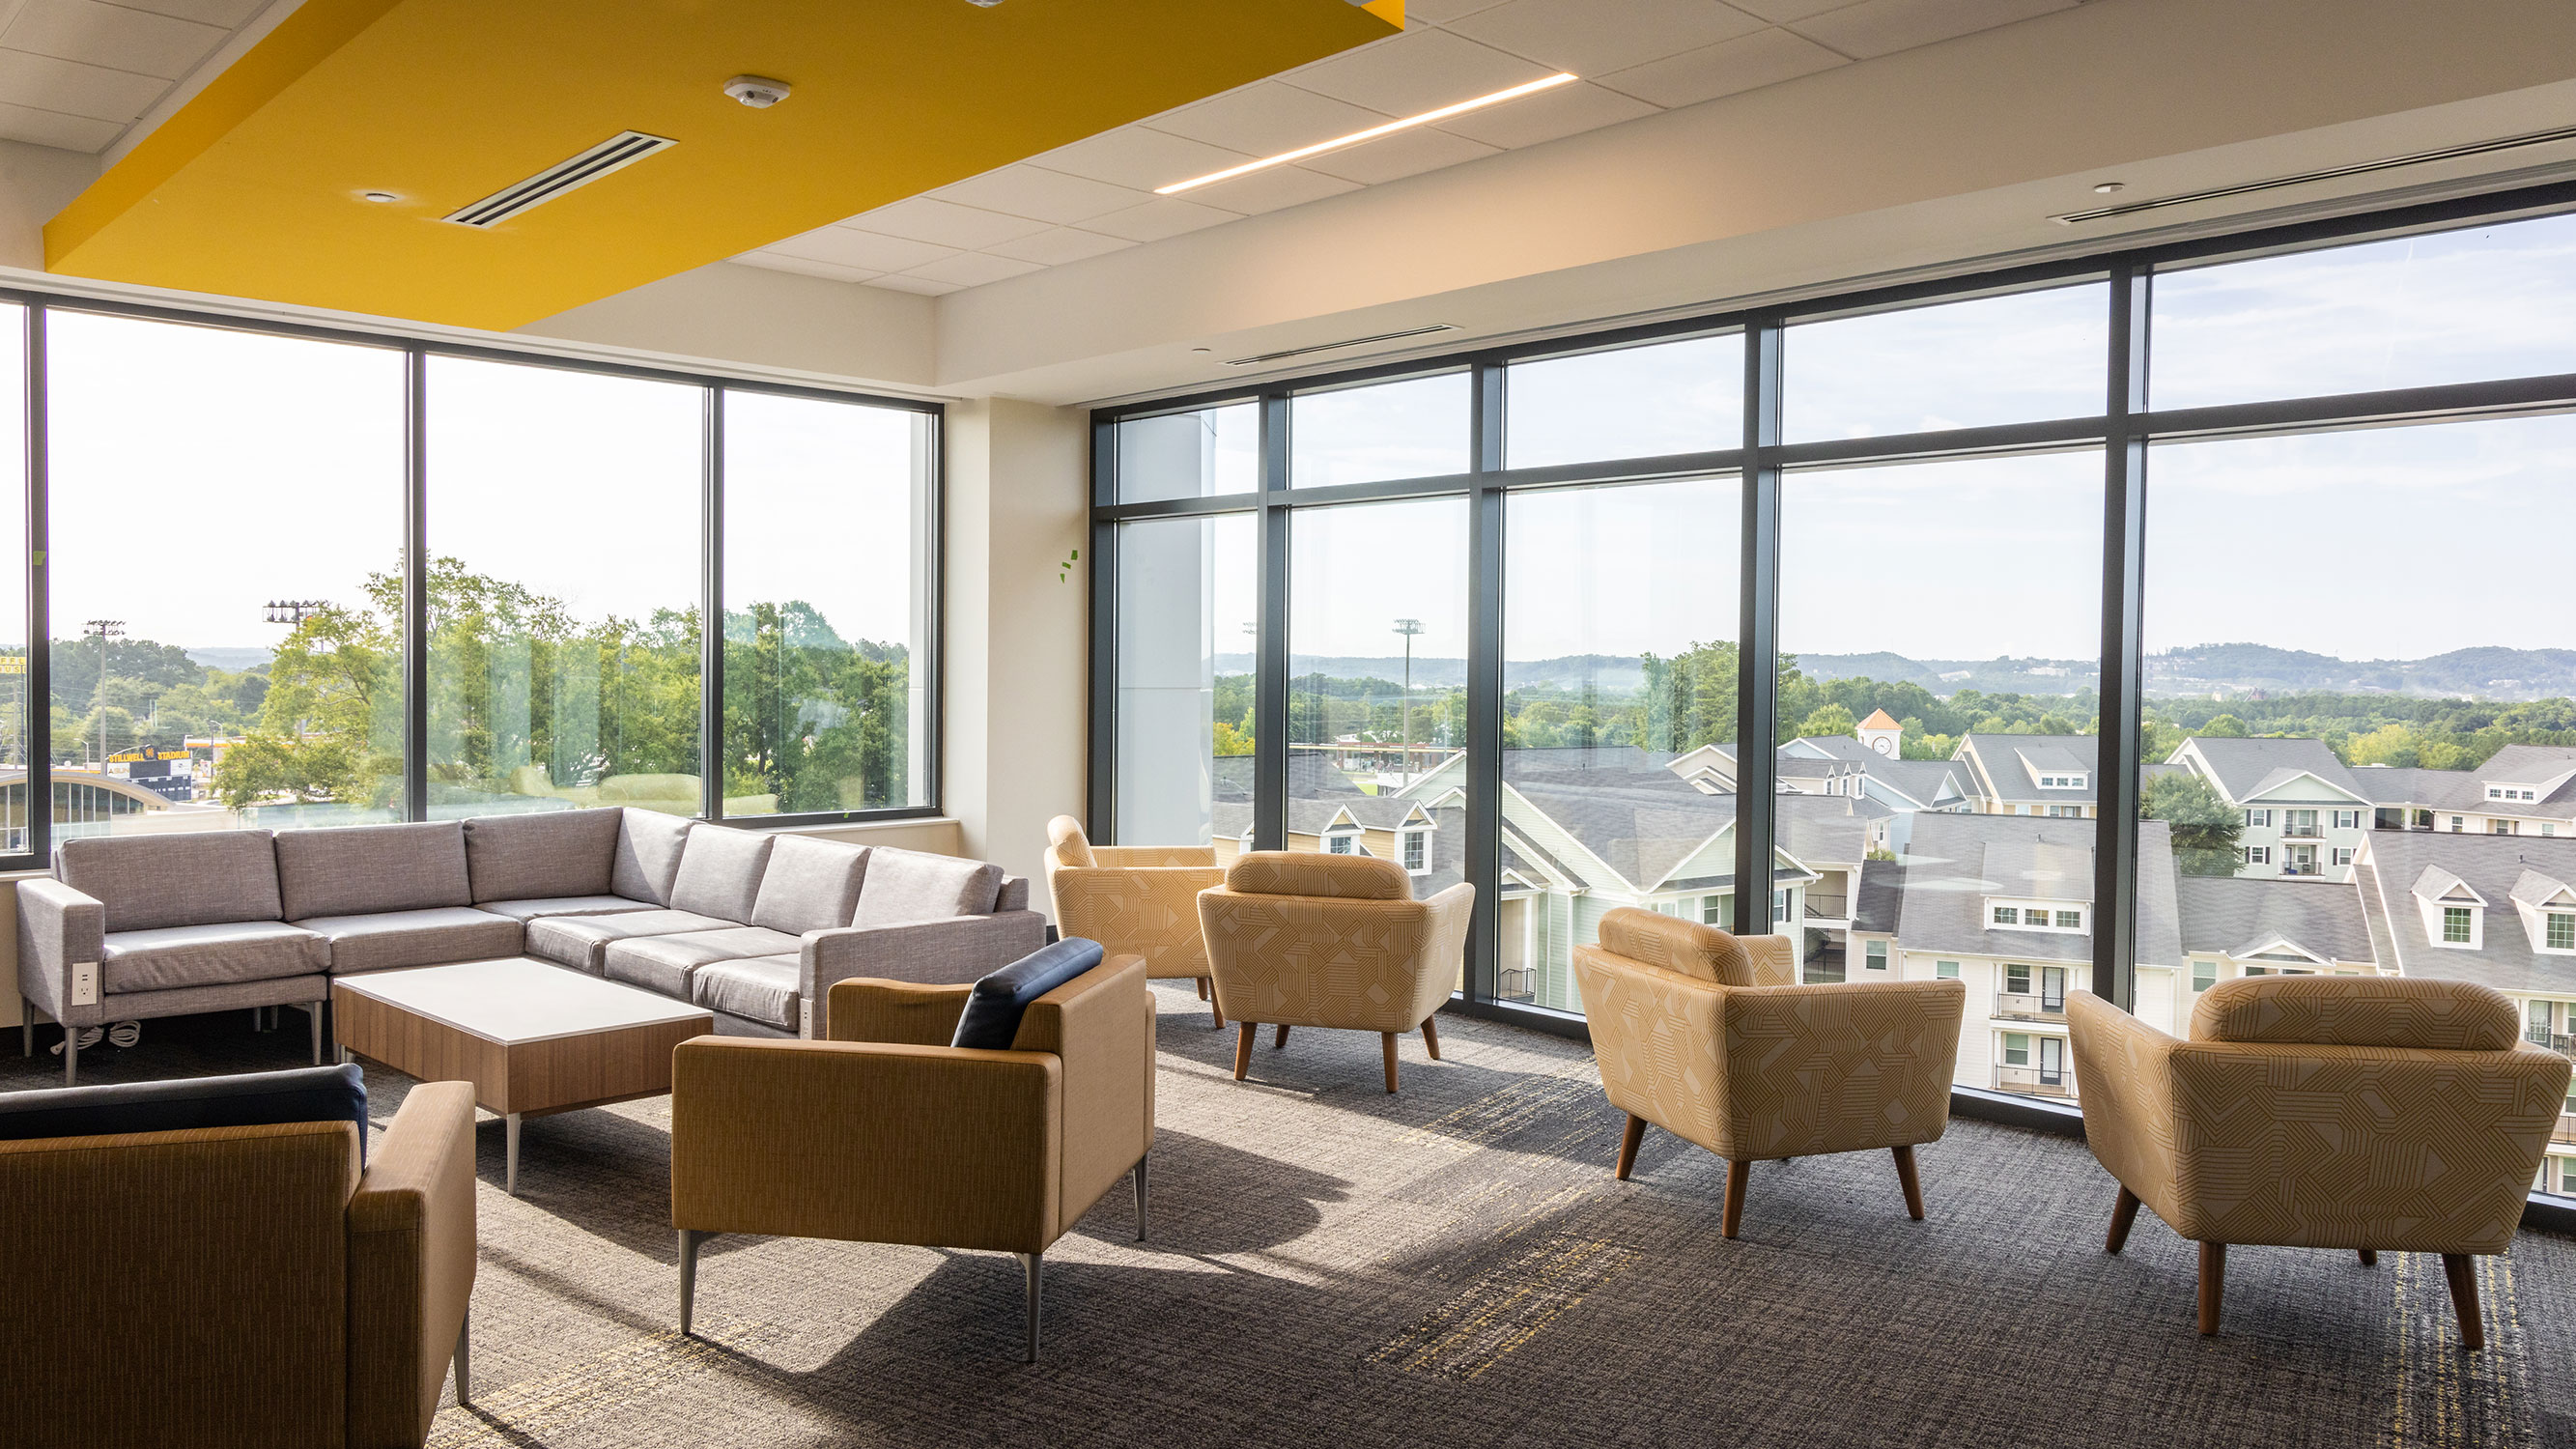  / Community lounge area overlooking campus